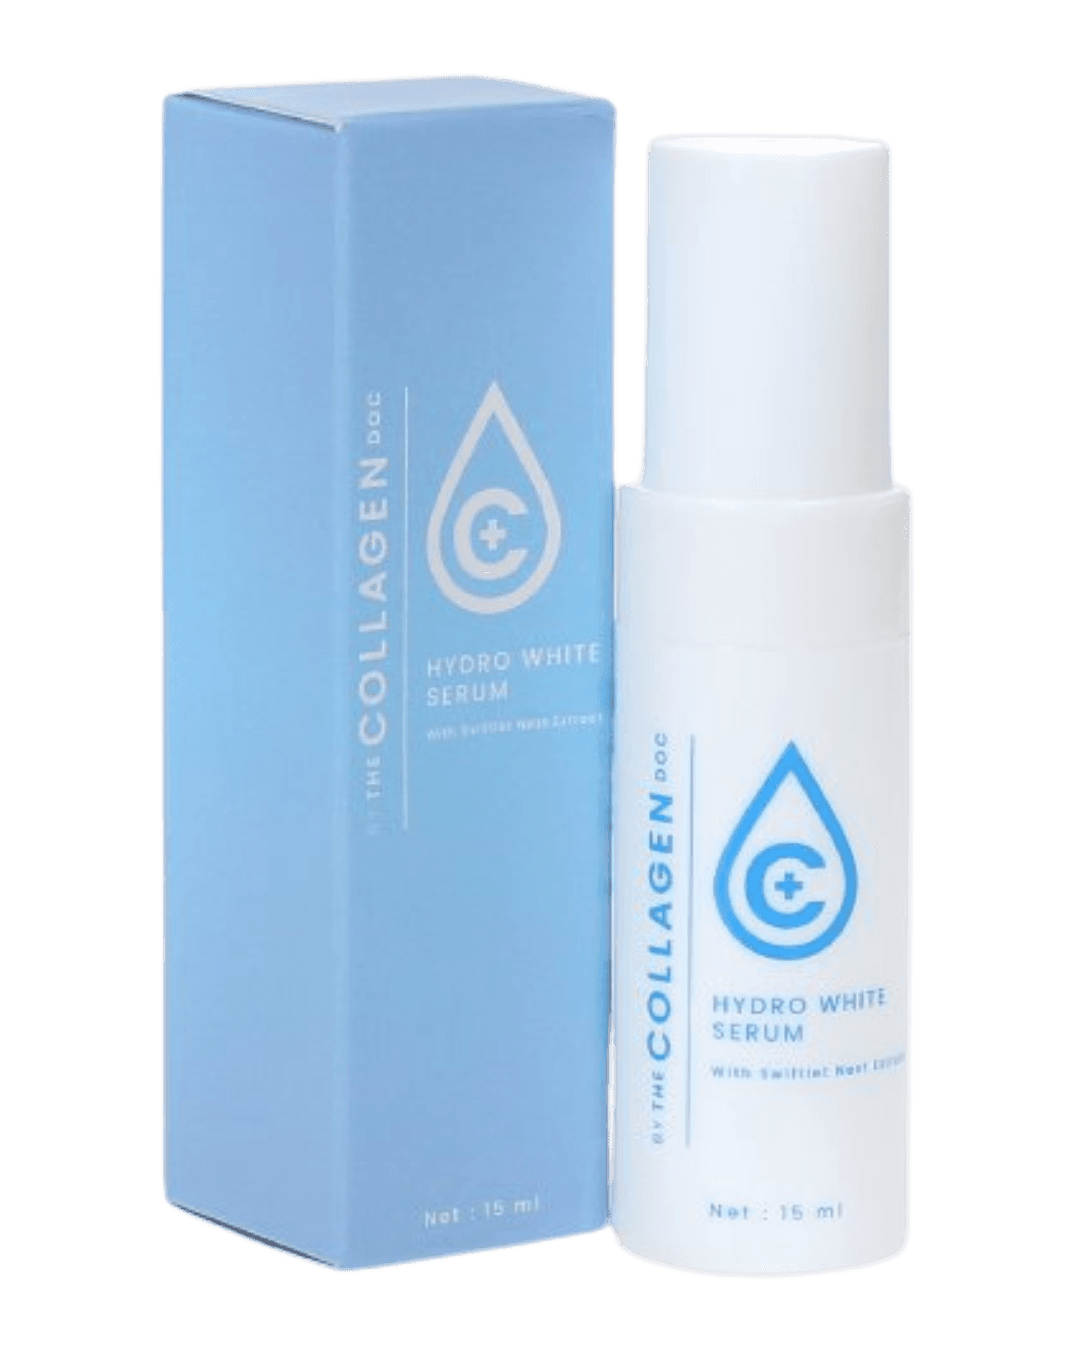 by The Collagen Doc Hydro White Serum with Swiftlet Nest Extract